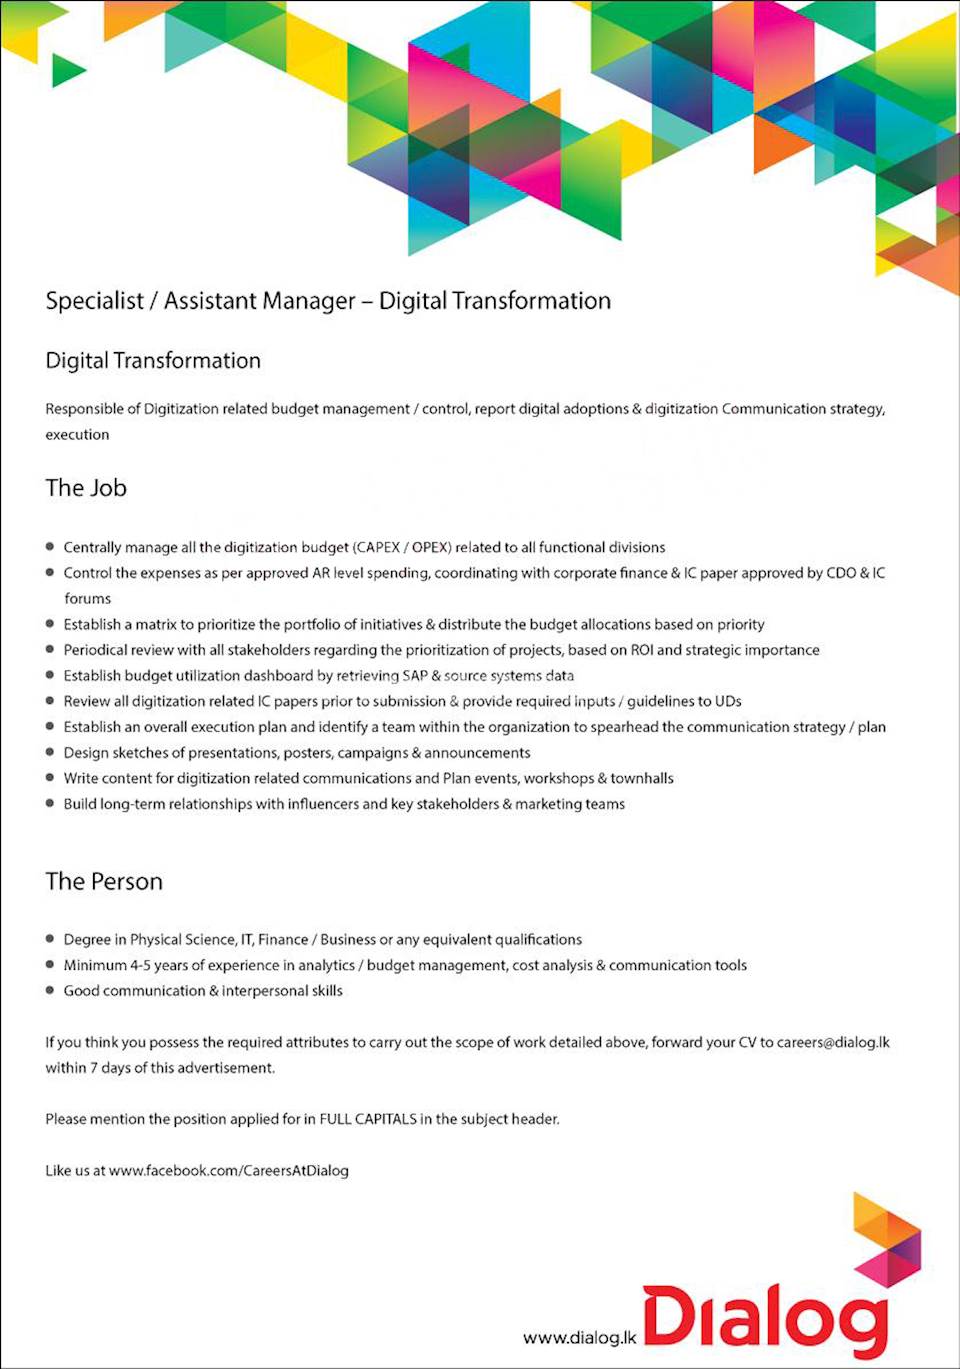 Specialist / Assistant Manager - Digital Transformation